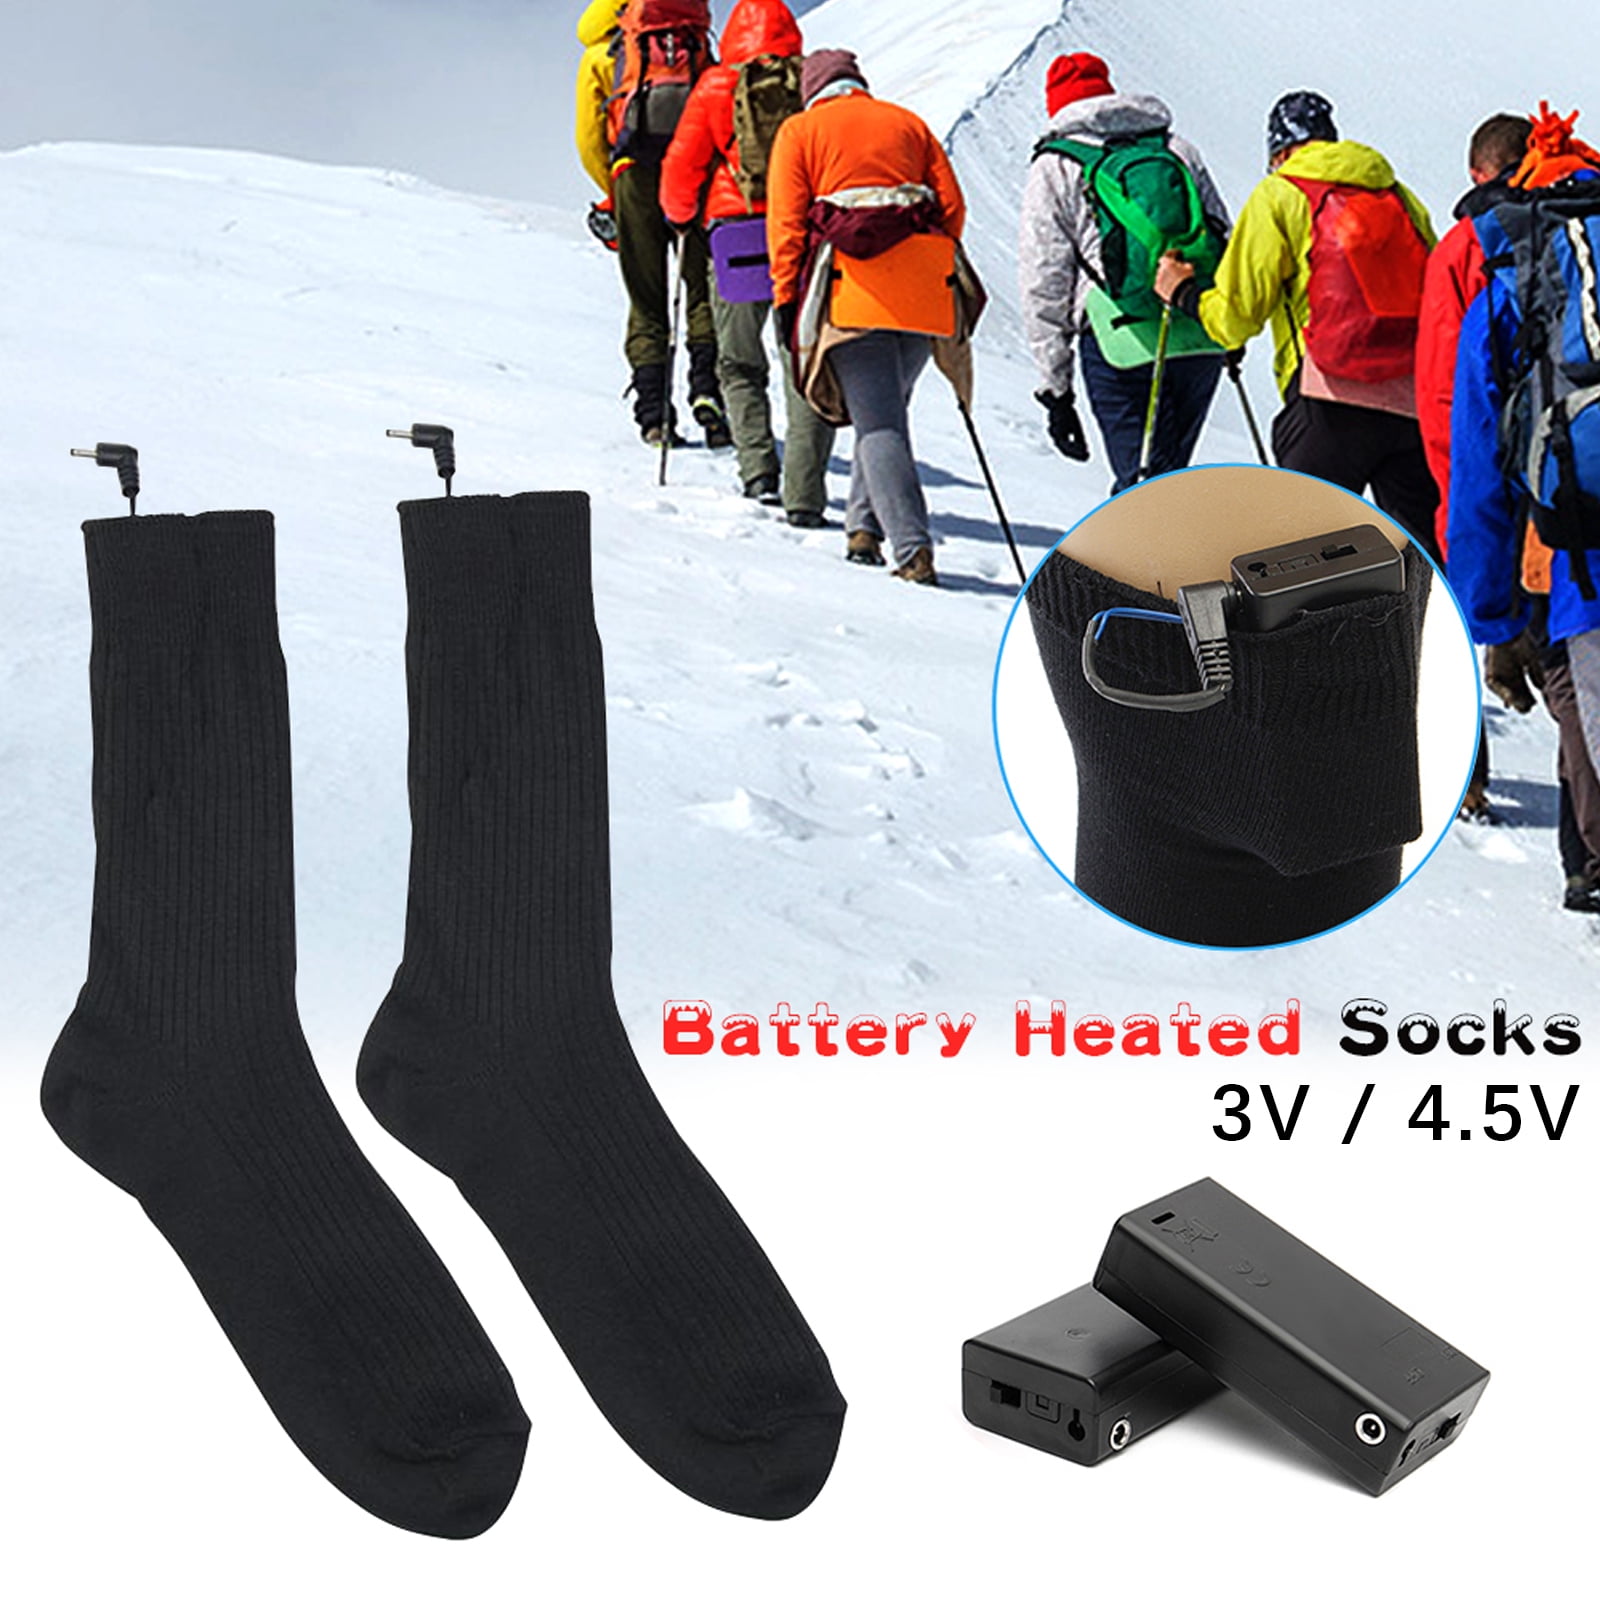 Electric Heated Socks Rechargeable Battery 4.5V Foot Warm Winter Skiing Hunting 